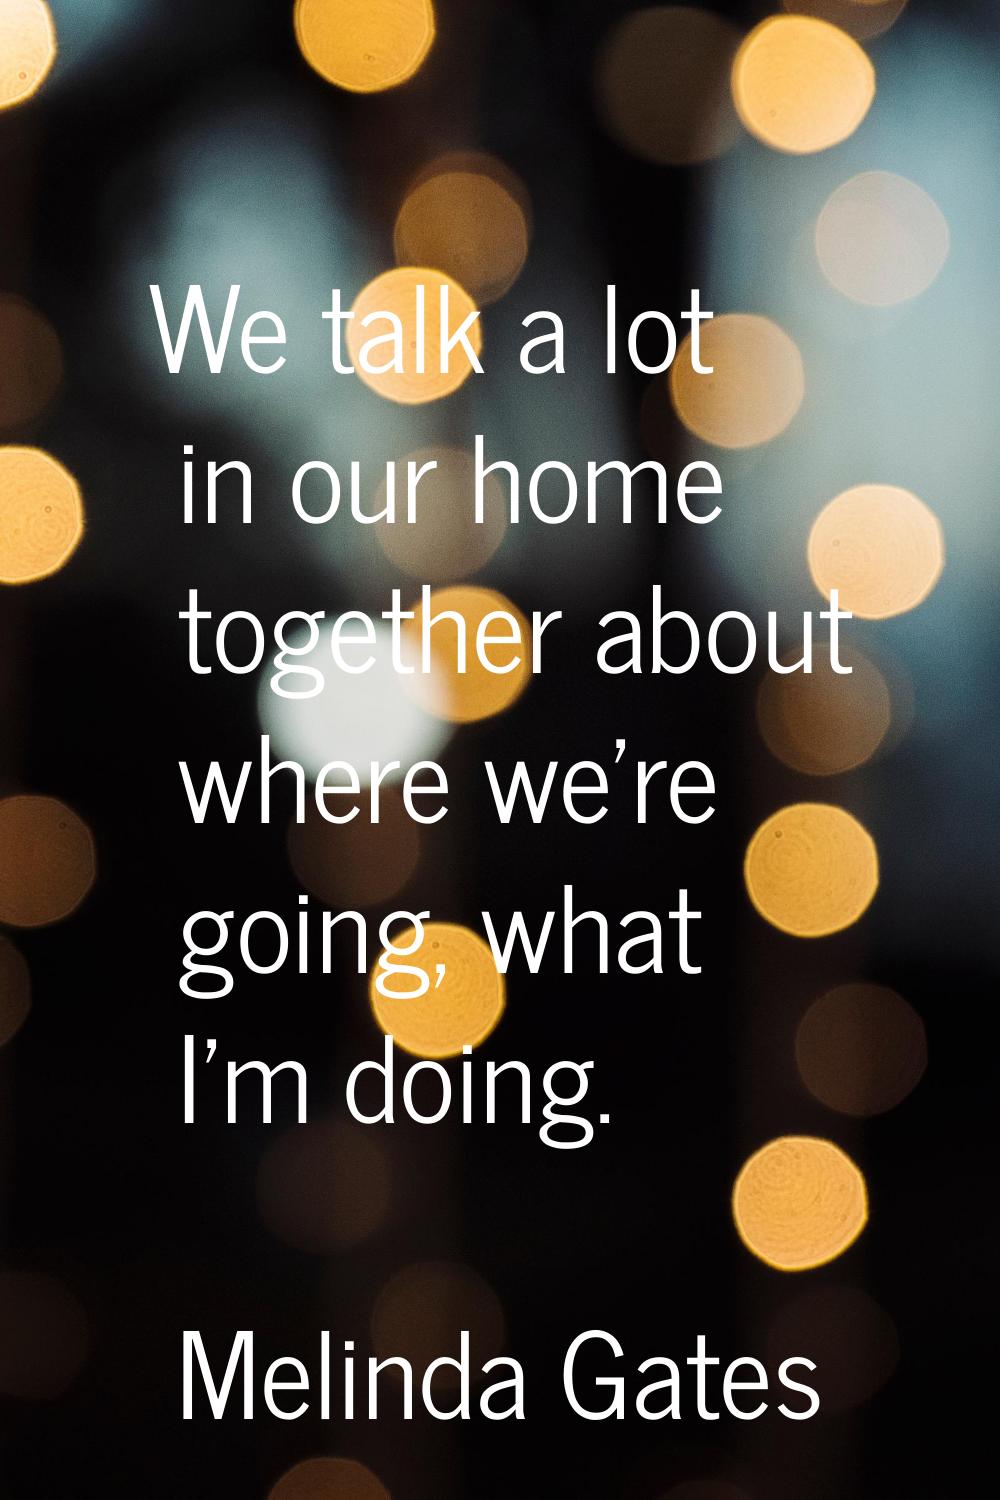 We talk a lot in our home together about where we're going, what I'm doing.